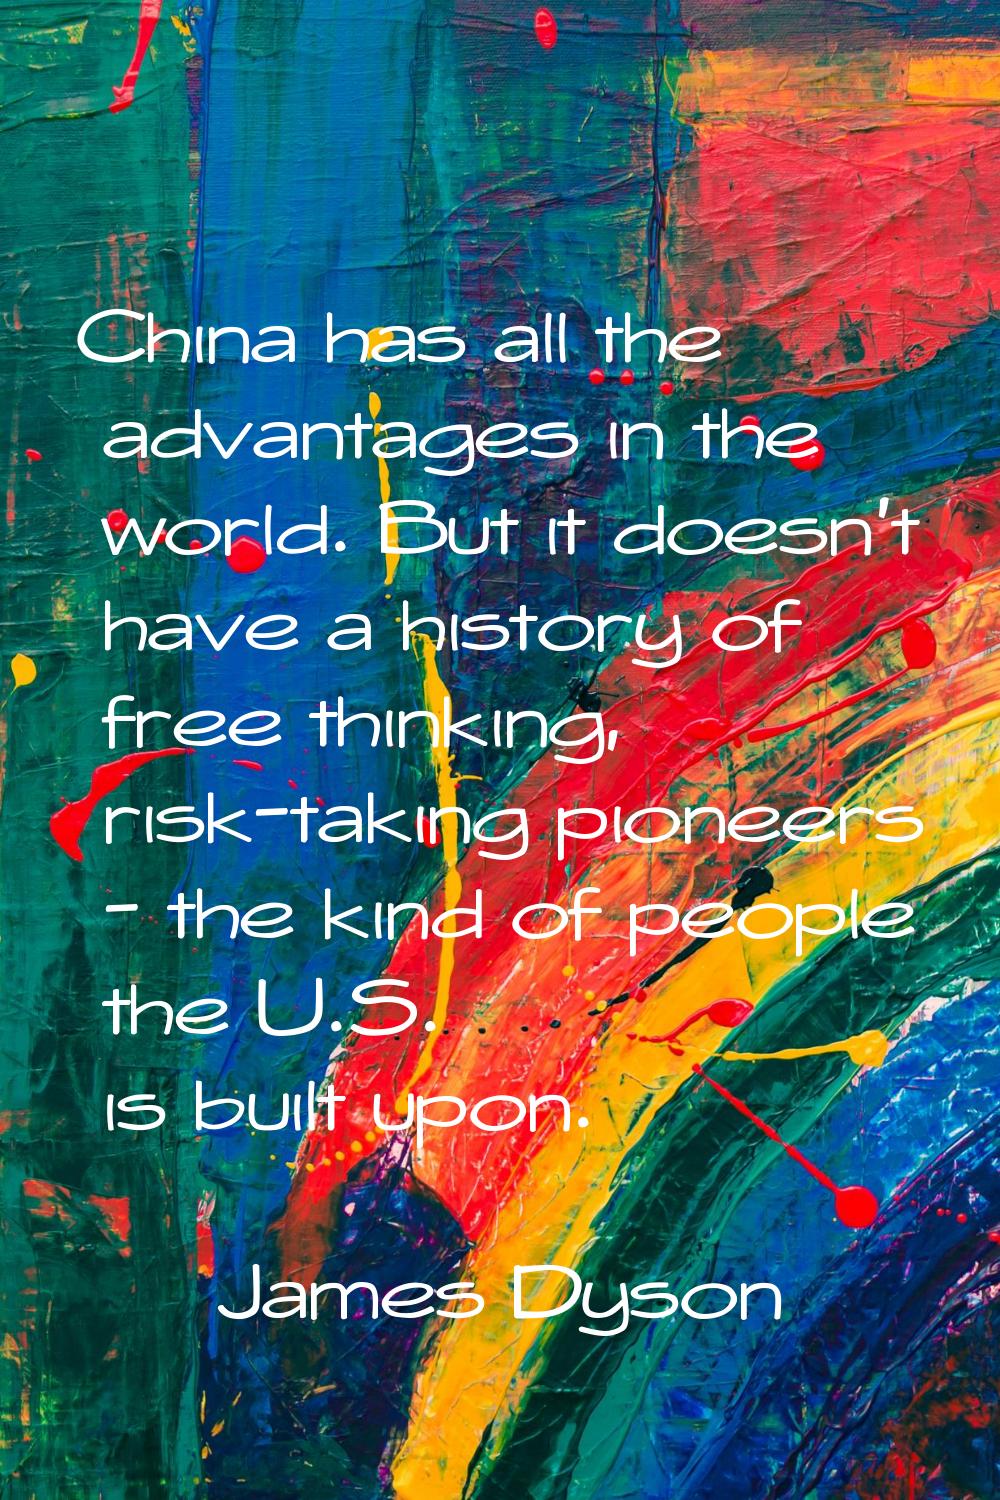 China has all the advantages in the world. But it doesn't have a history of free thinking, risk-tak